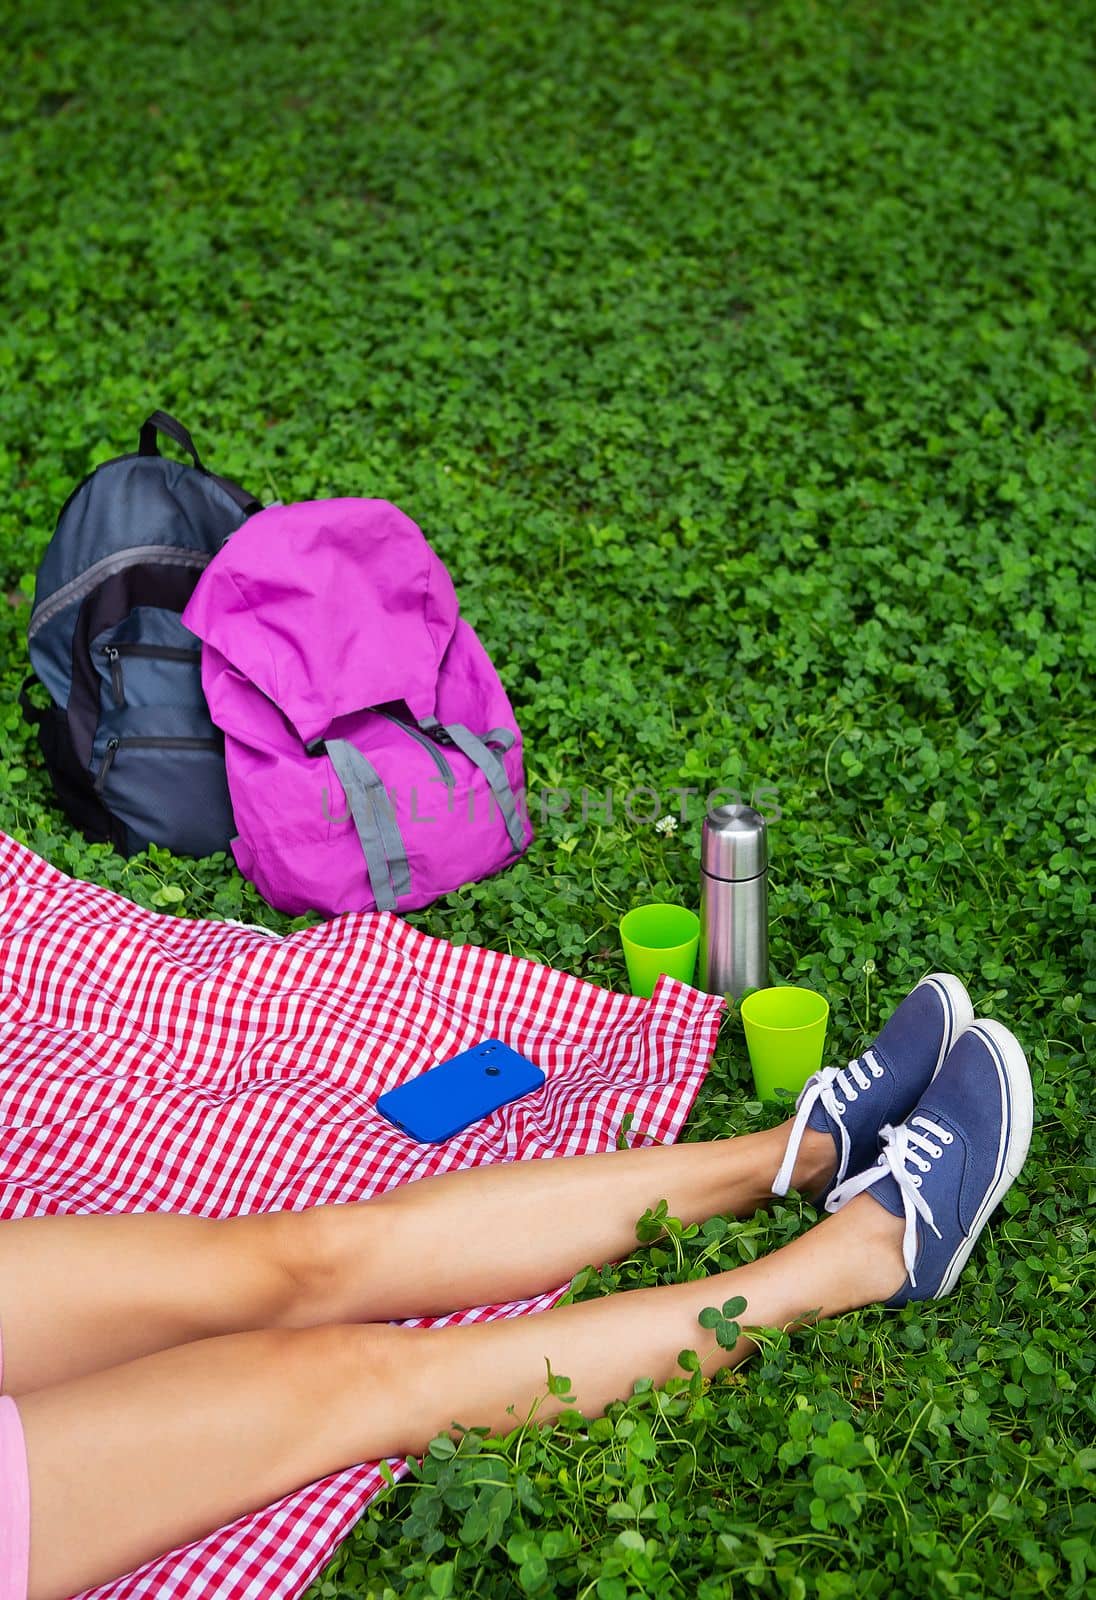 Top view of a young female student sitting on a plaid blanket and green grass in the park. Break in the open air, drink coffee, tea, phone in hand